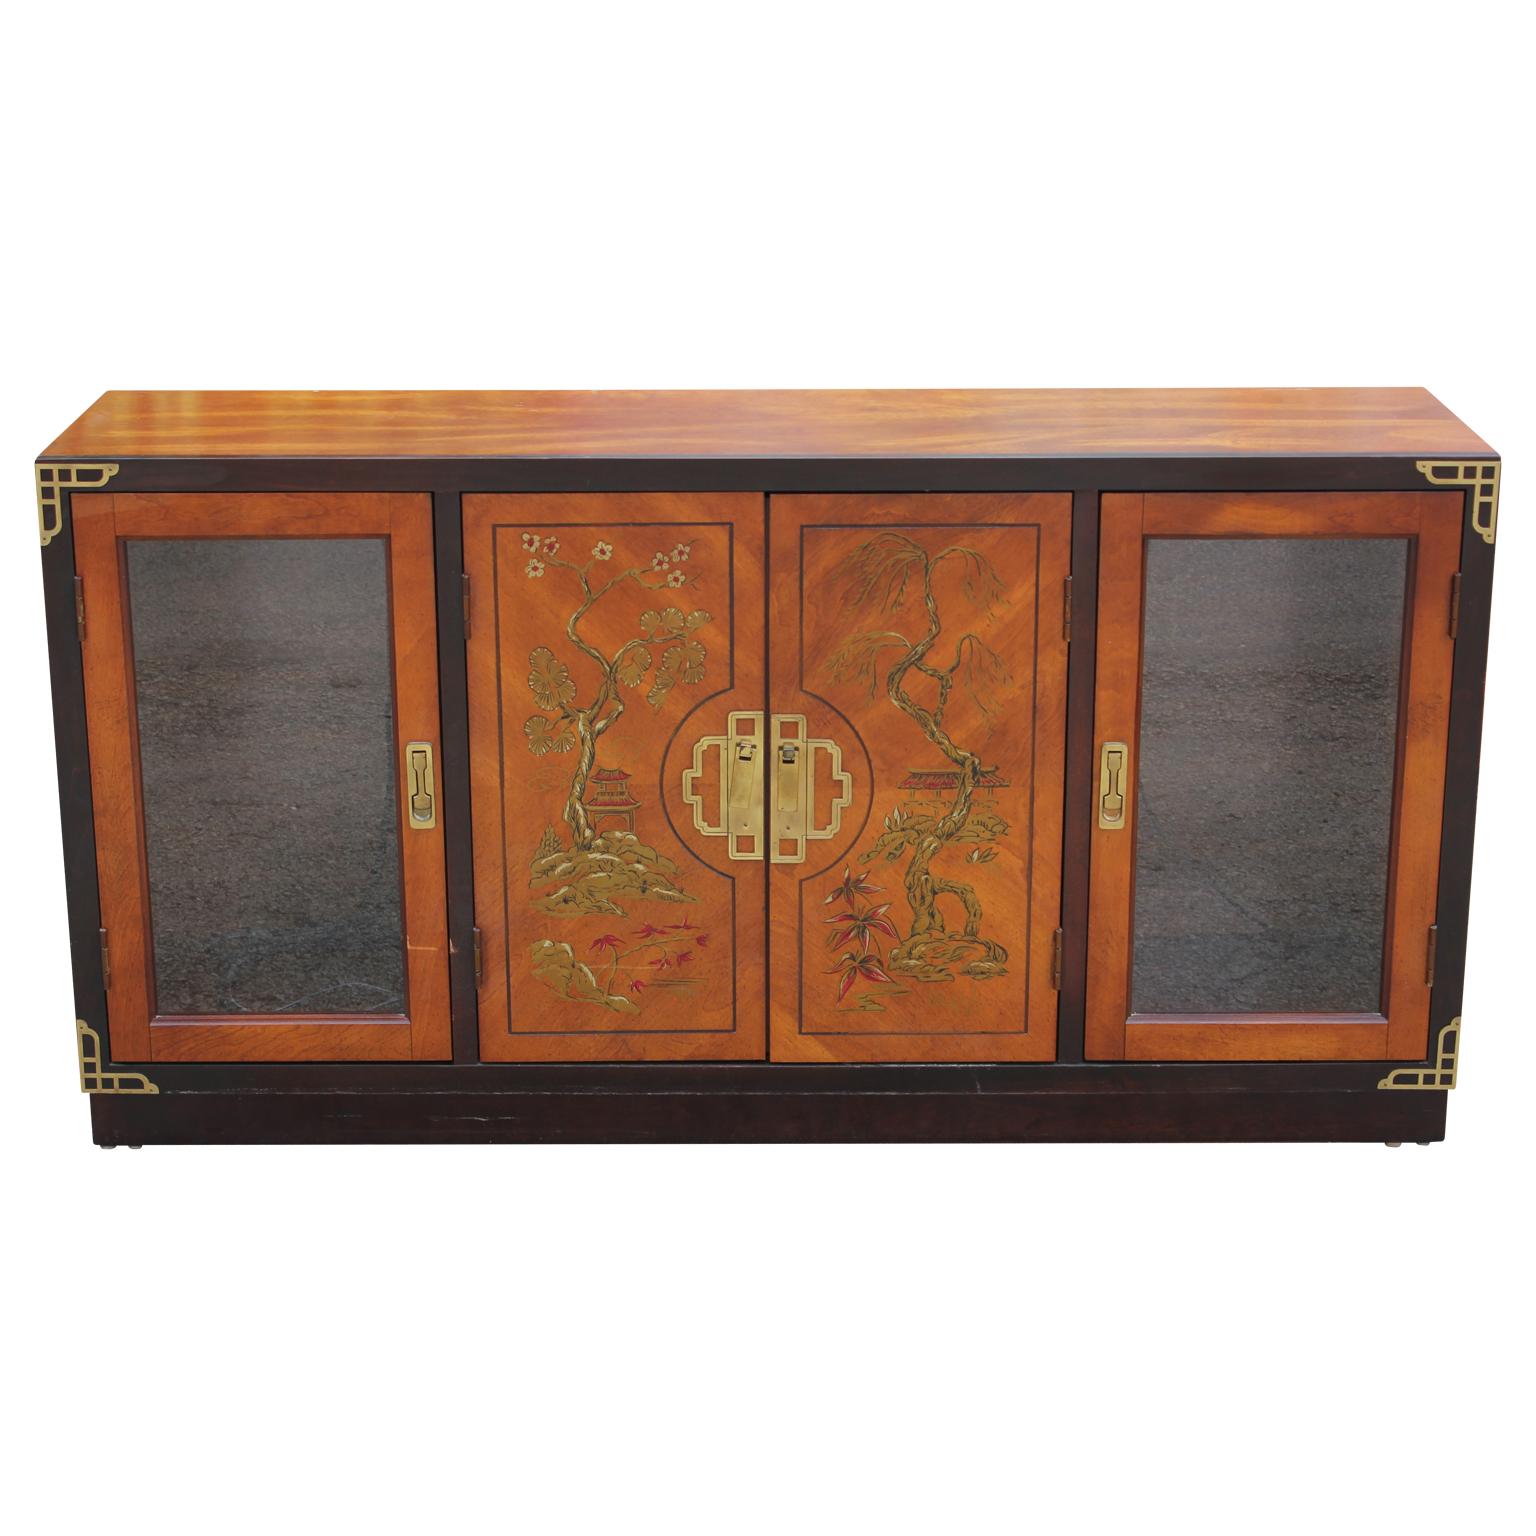 Mid-20th Century Hollywood Regency Walnut Two-Tone Cabinet with Painted Chinoiserie Motifs